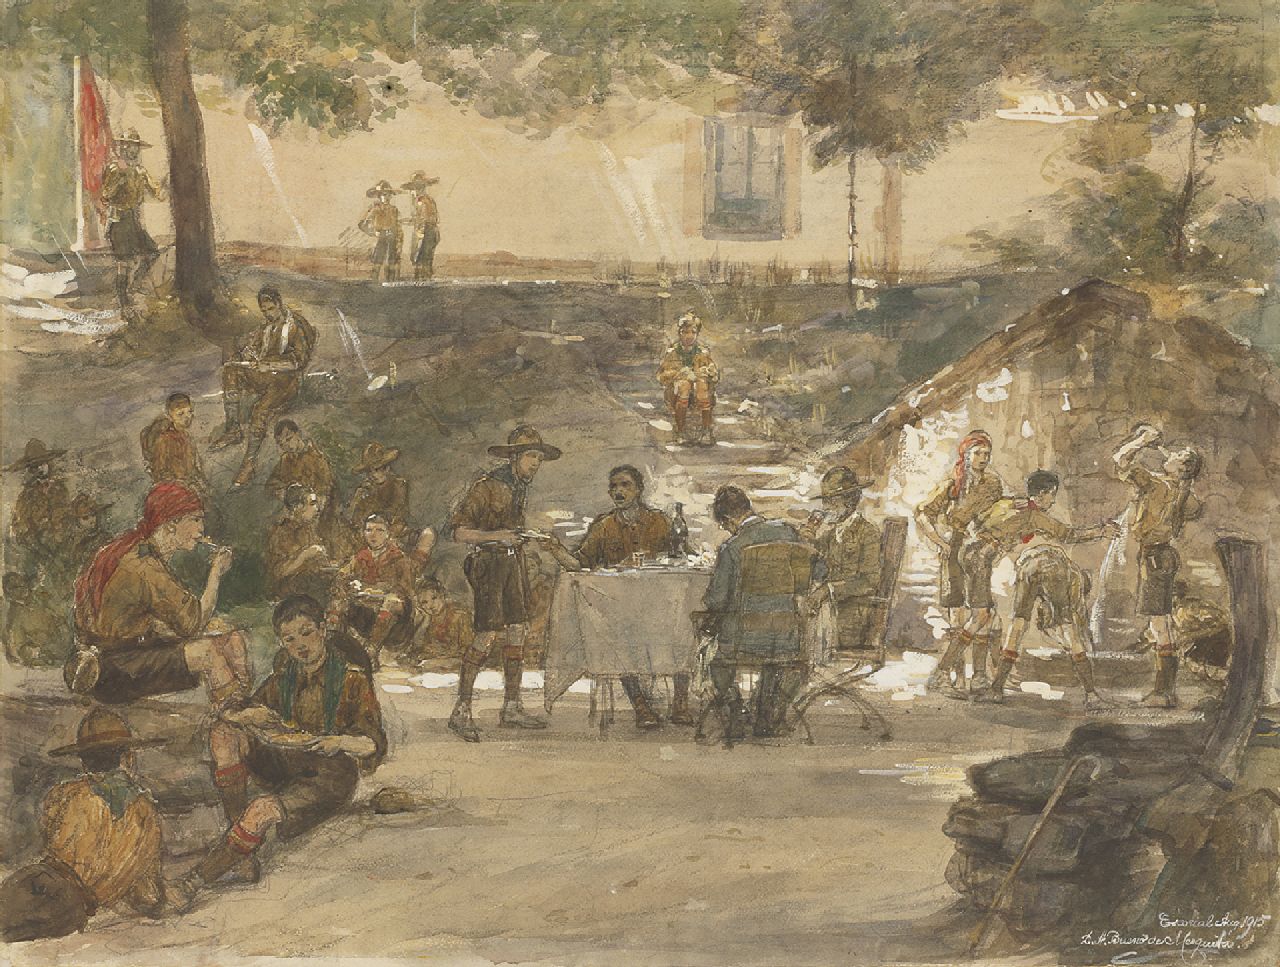 David Abraham Bueno de Mesquita | Boy scouts at the Escorial, Spain, black chalk and watercolour on paper, 47.5 x 63.0 cm, signed l.r. and dated 'Escorial' Aug 1915